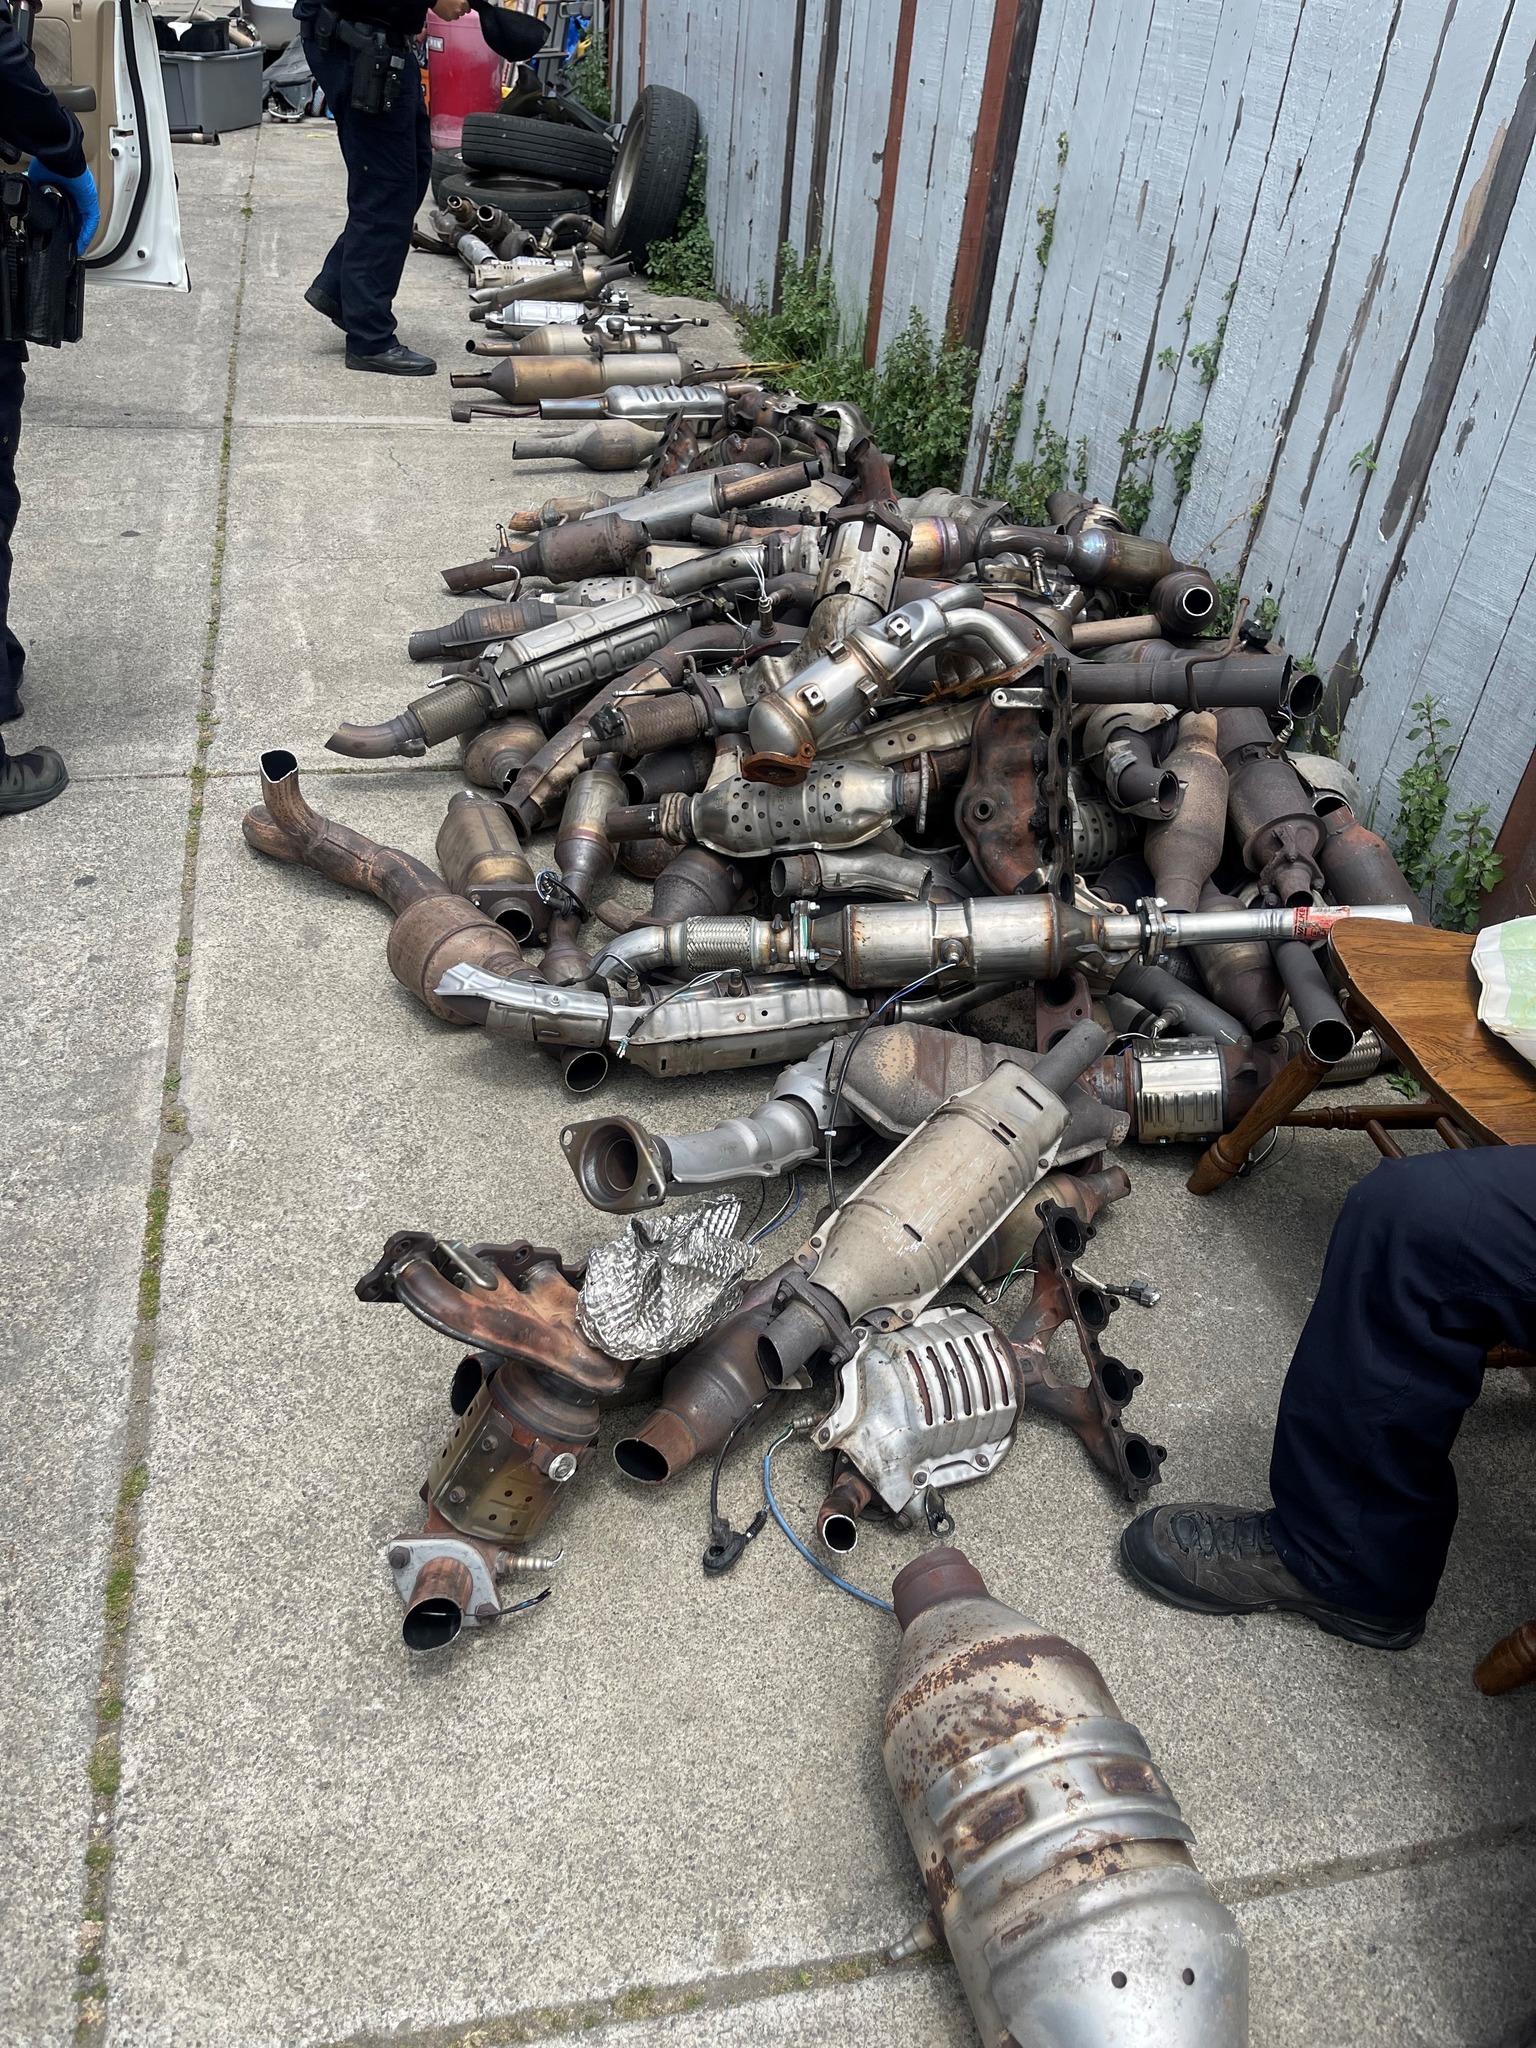 A large pile of catalytic converters found in raids are strewn across a sidewalk against a wooden fence.